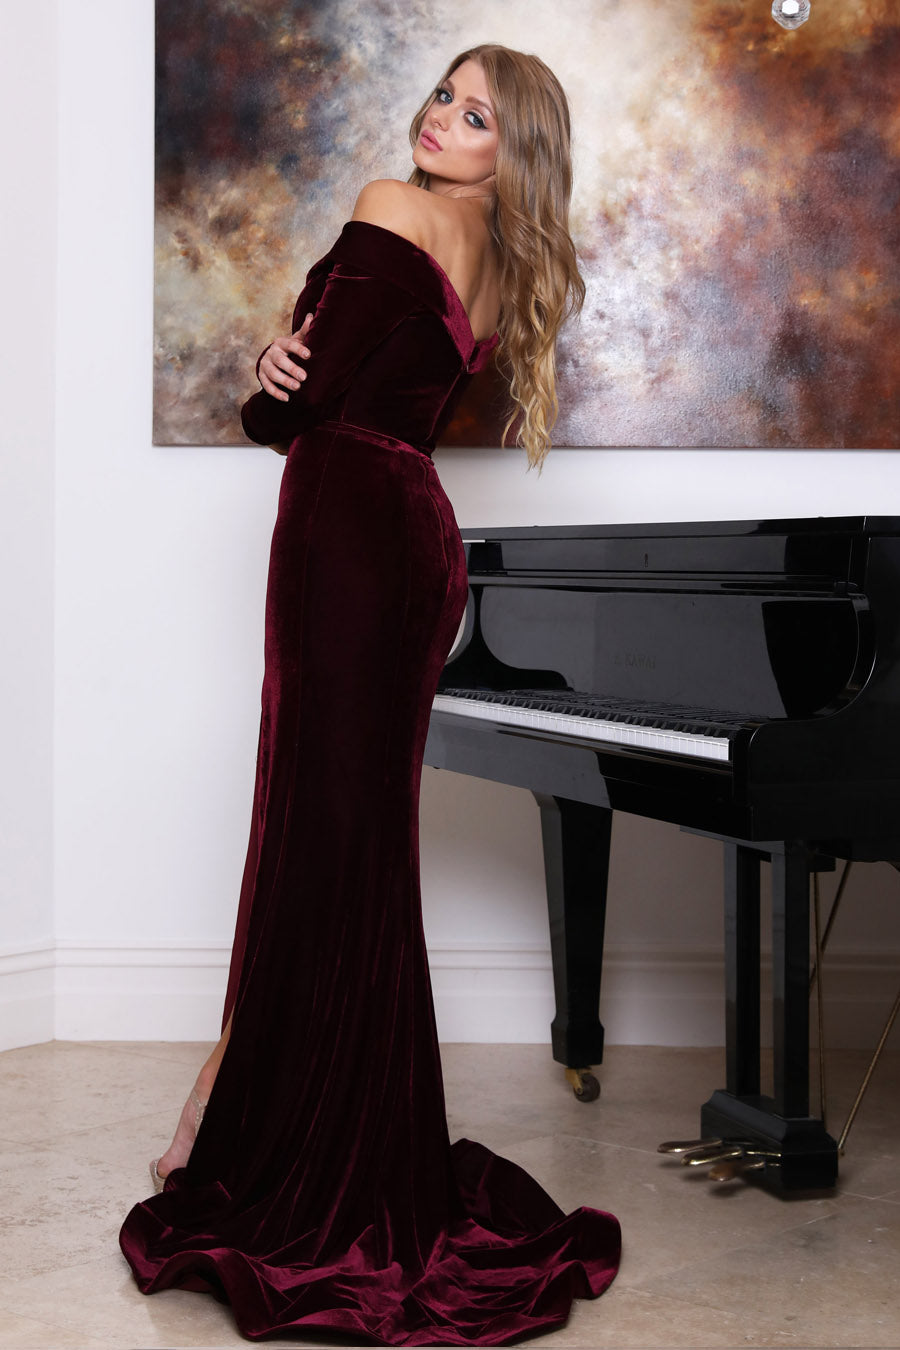 Tinaholy Couture TA807 Wine Red Velvet Long Sleeve Formal Dress Tina Holly Couture$ AfterPay Humm ZipPay LayBuy Sezzle